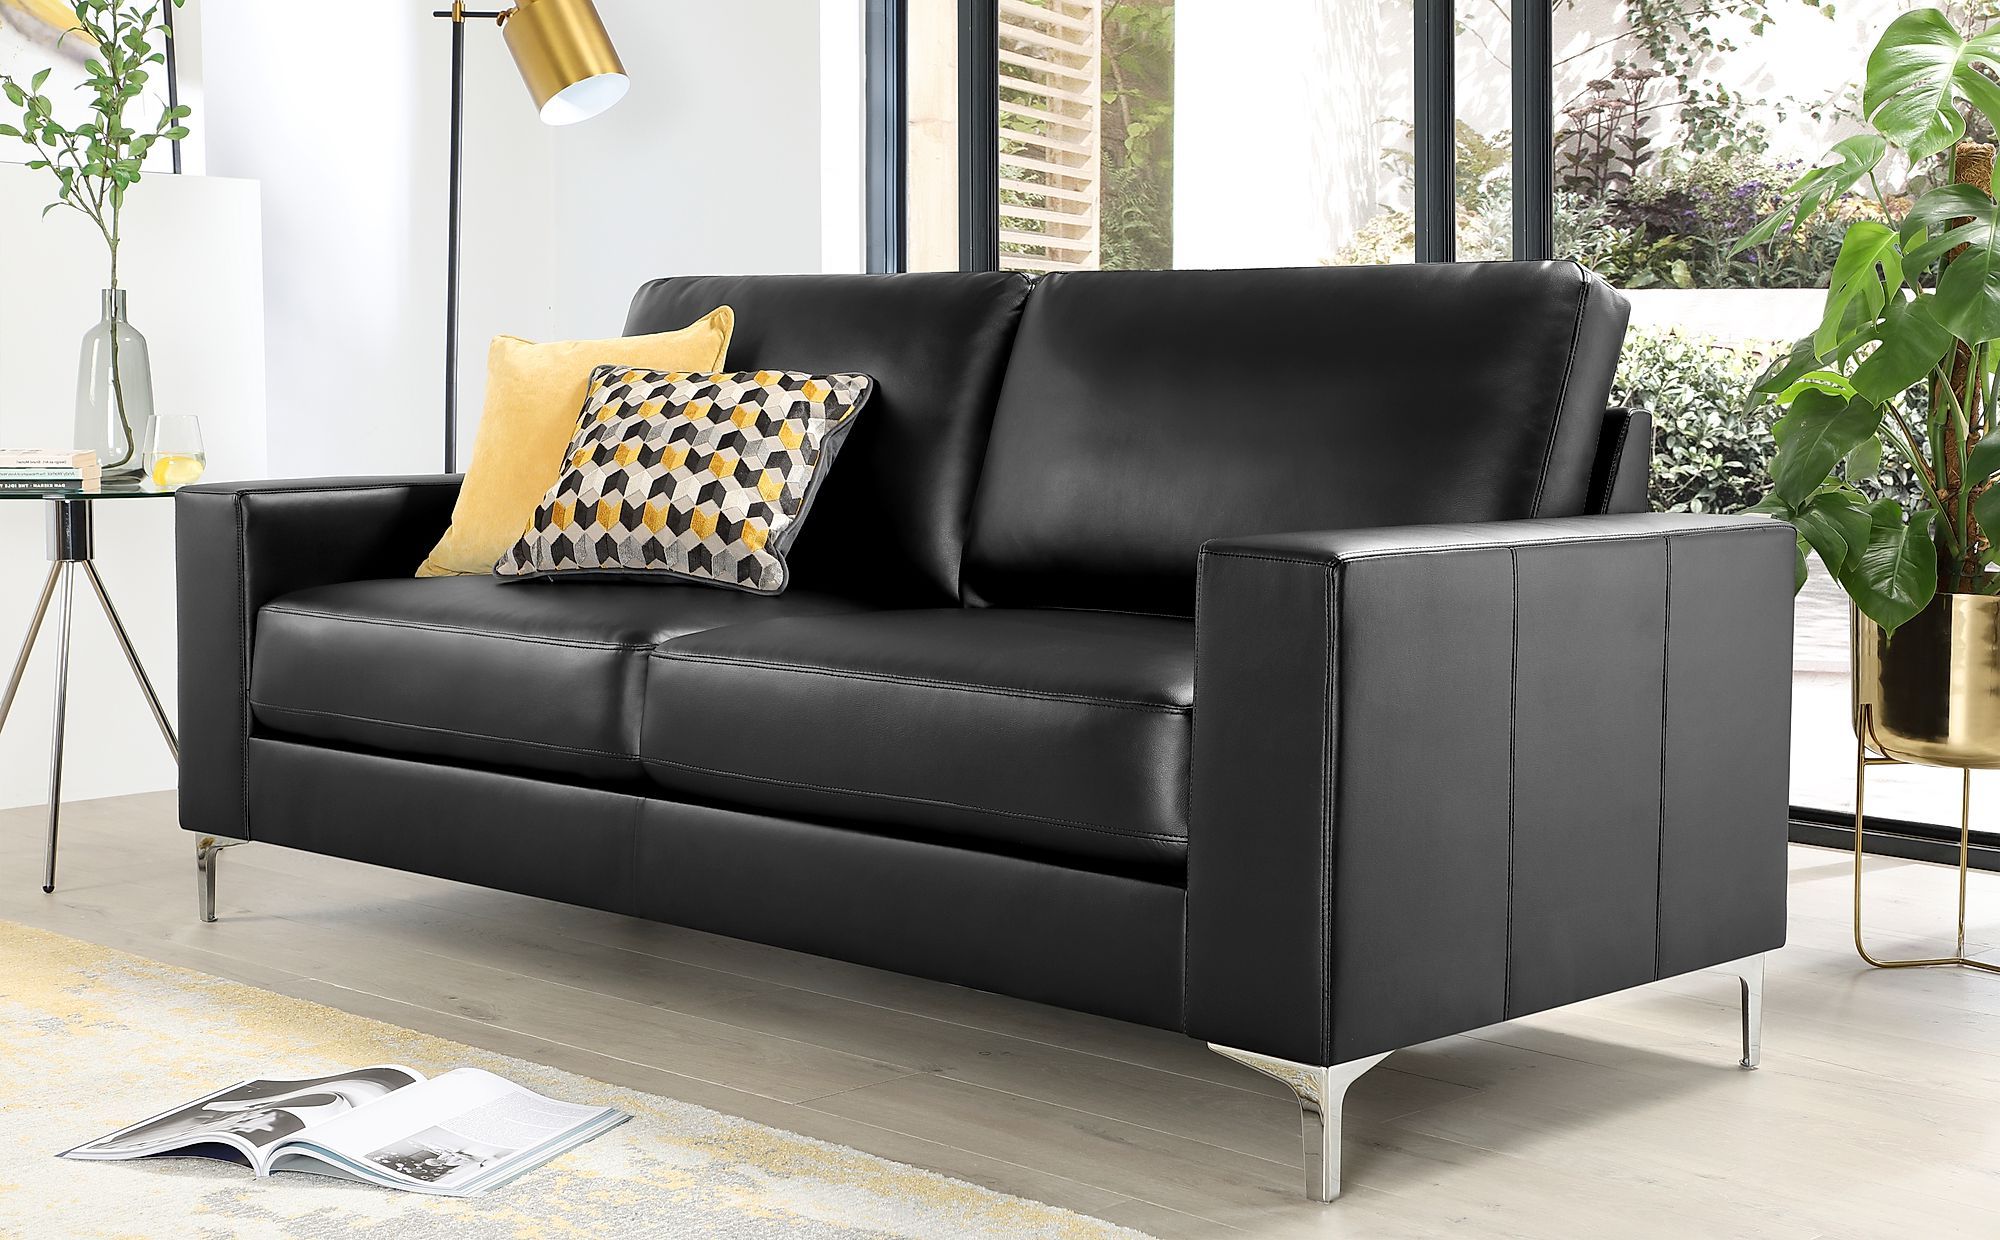 Modern 3 Seater Sofas Pertaining To 2018 Baltimore Black Leather 3 Seater Sofa (View 14 of 15)